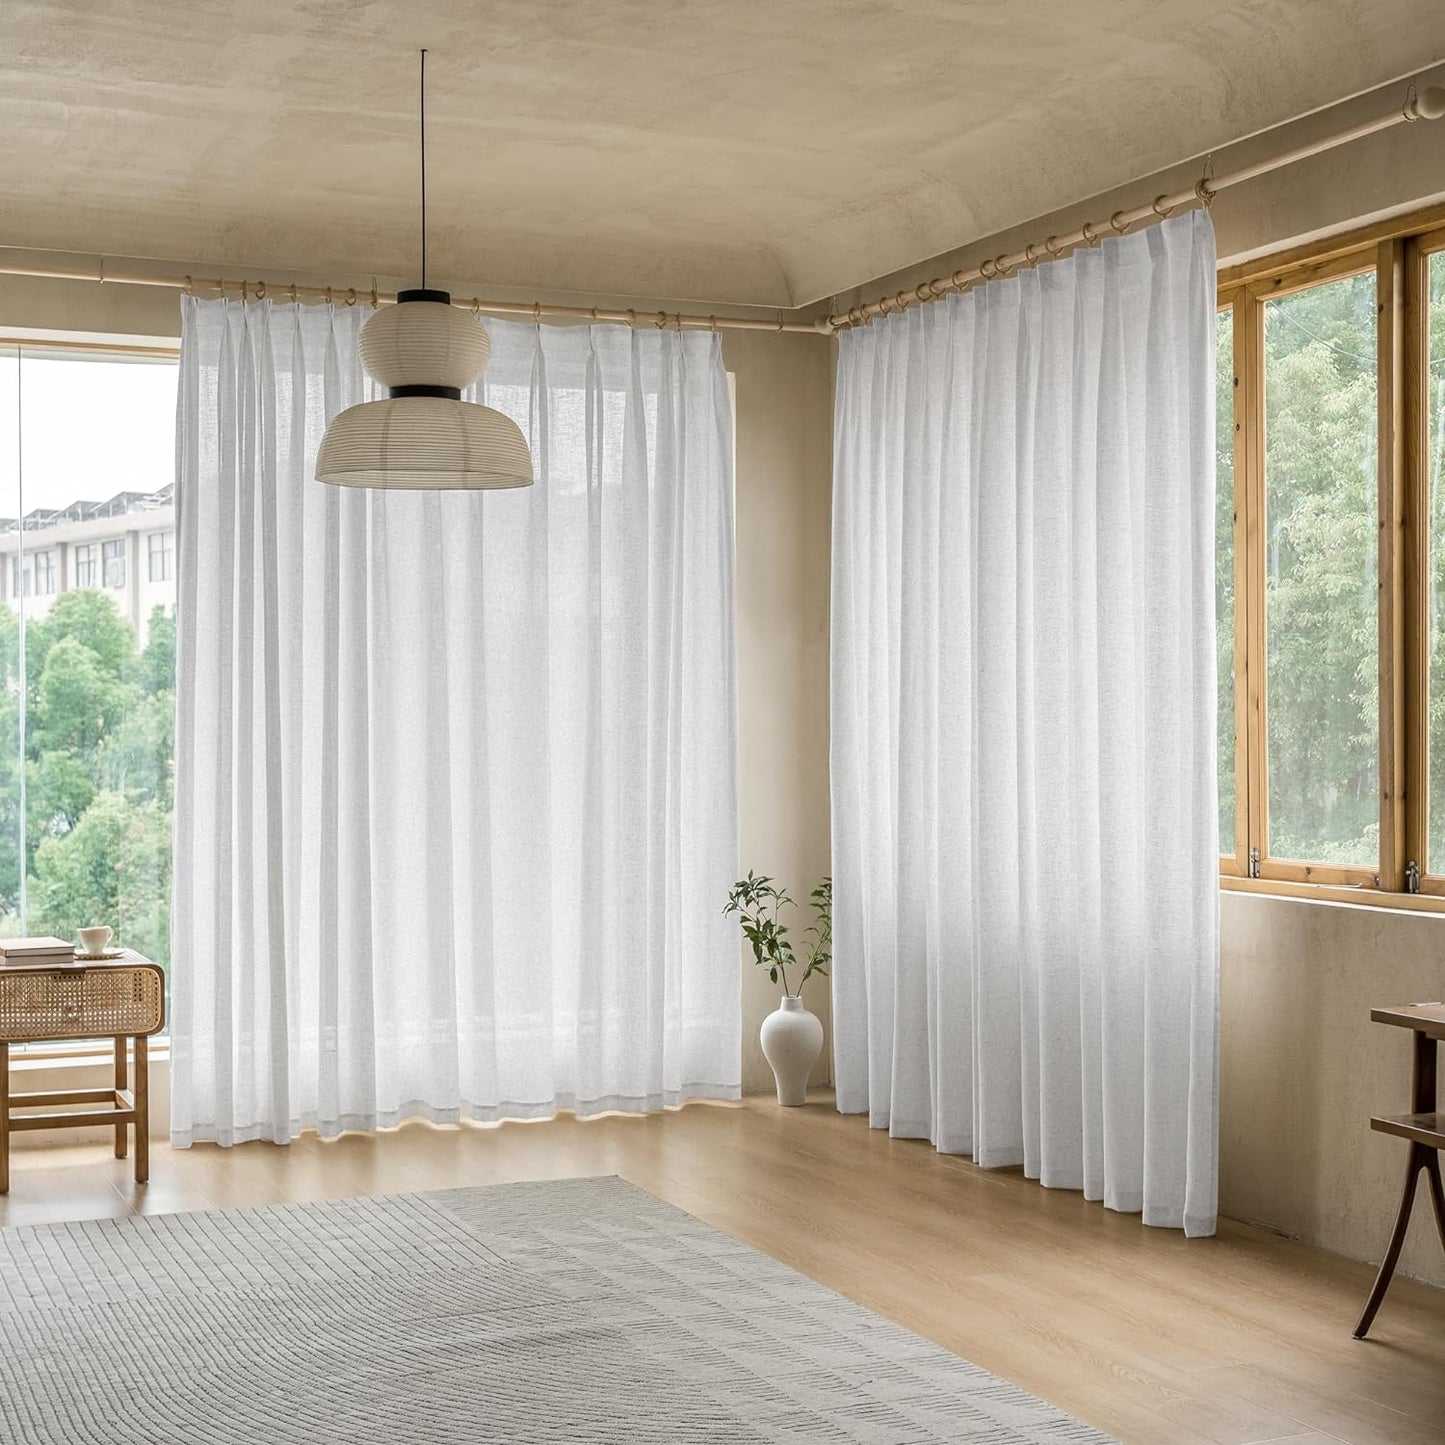 MAIHER Extra Wide Pinch Pleated Drapes 108 Inches Long, Faux Linen Light Filtering Semi Sheer Curtains with Hooks for Living Room Bedroom, Natural Linen (1 Panel, 100 W X 108 L)  MAIHER Beige White 84X108 